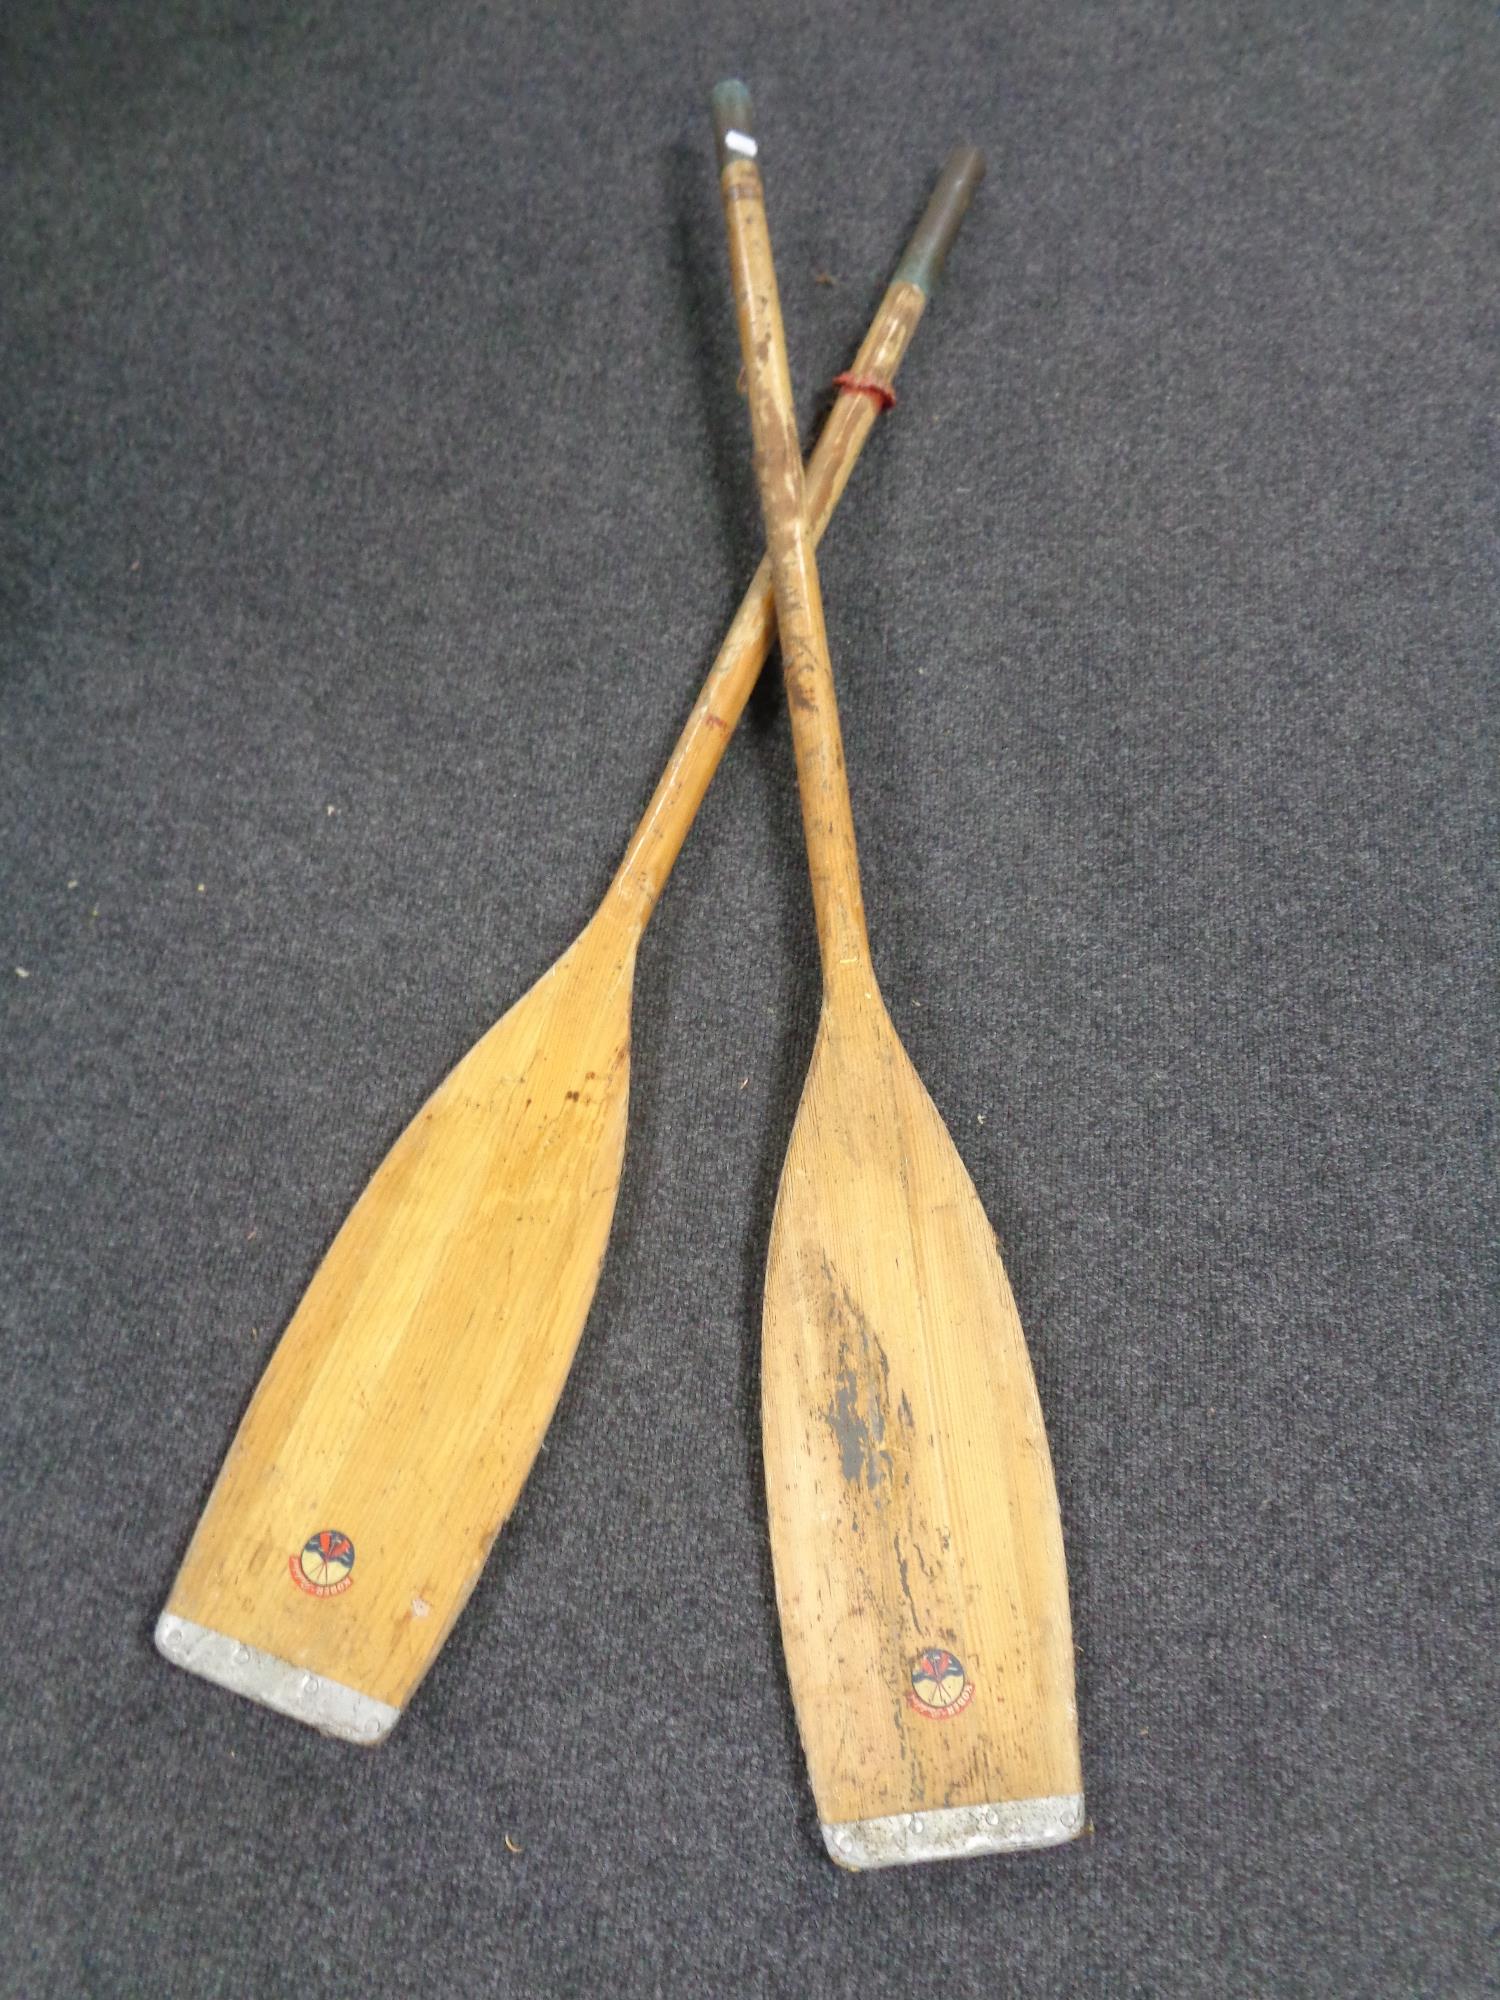 A pair of 20th century Kober wooden paddles.